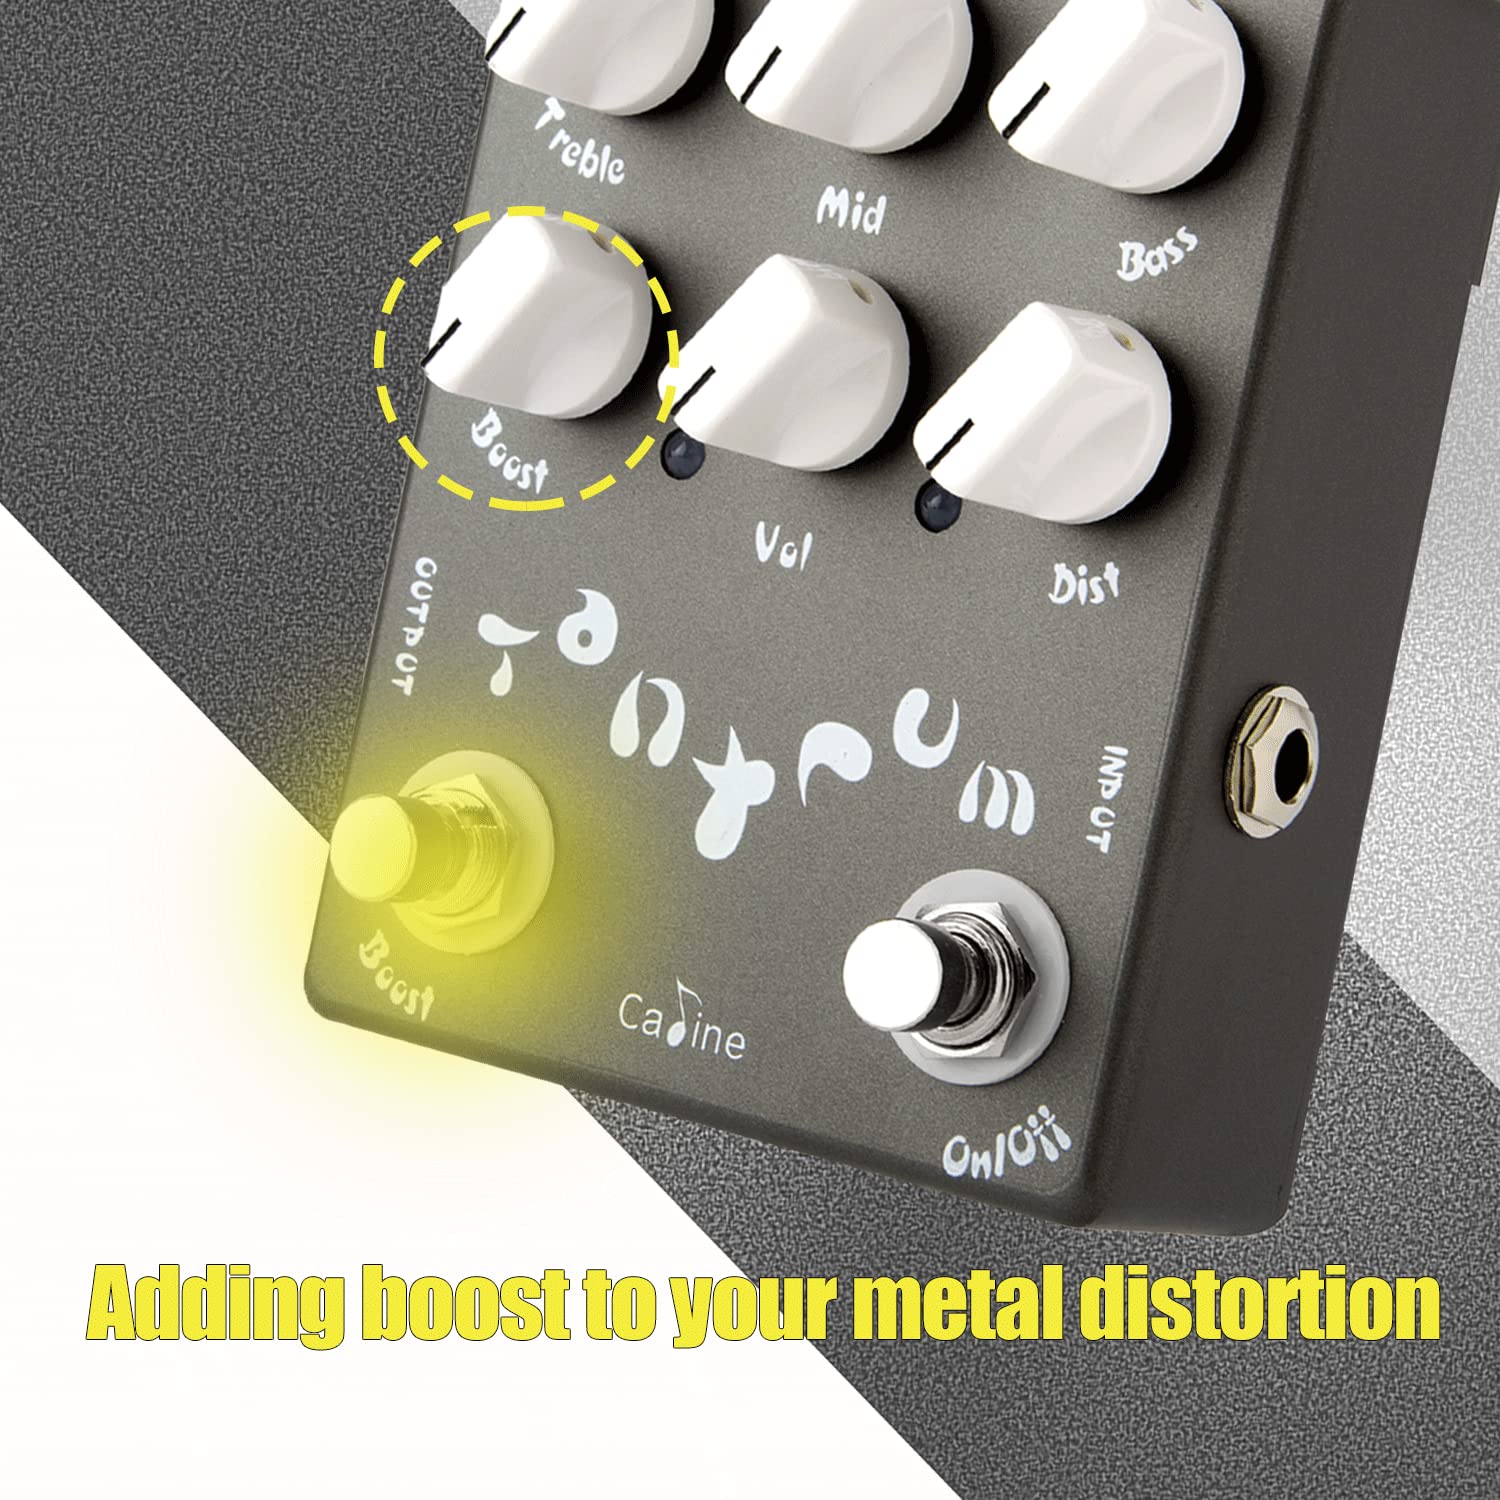 Caline CP-15 Guitar Metal Distortion Pedal with 3 Band EQ and Low-Mid-High Gain Boost Effect Bypass Design